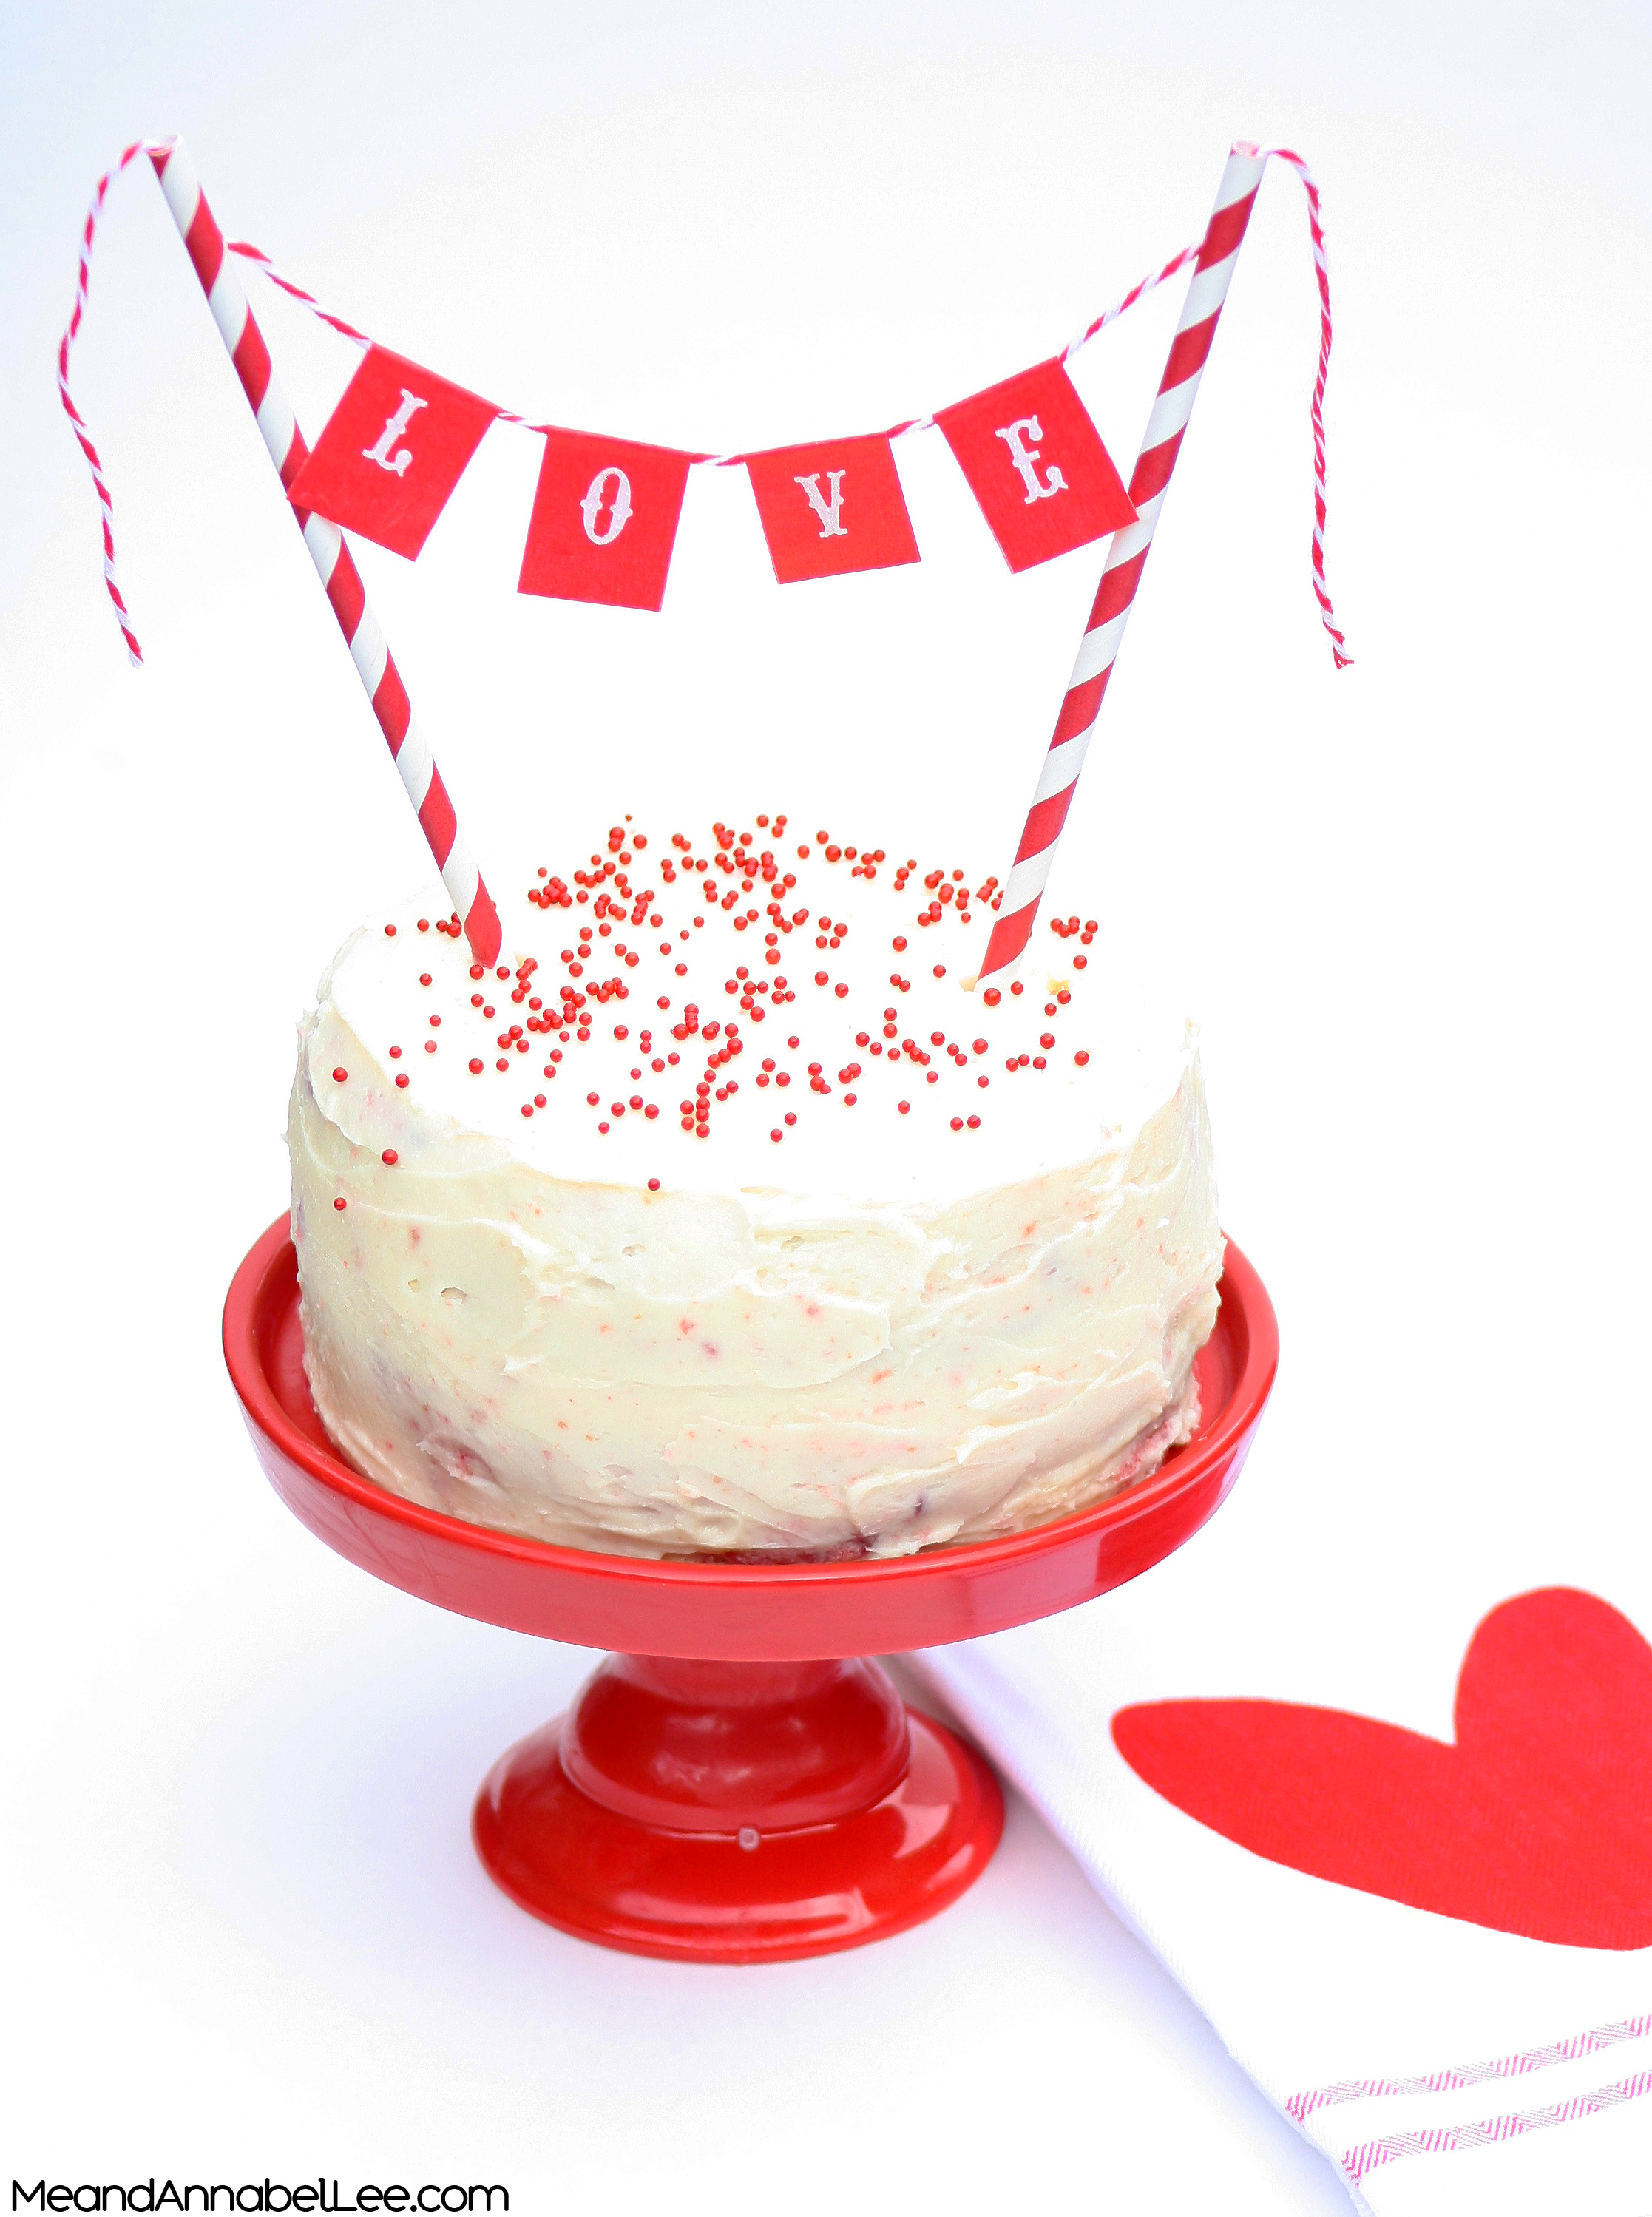 Valentine Cake Topper - LOVE Pennant Flag Cake Topper - Red Cake Bunting - Valentine's Day Party Decor - meandannabellee.com